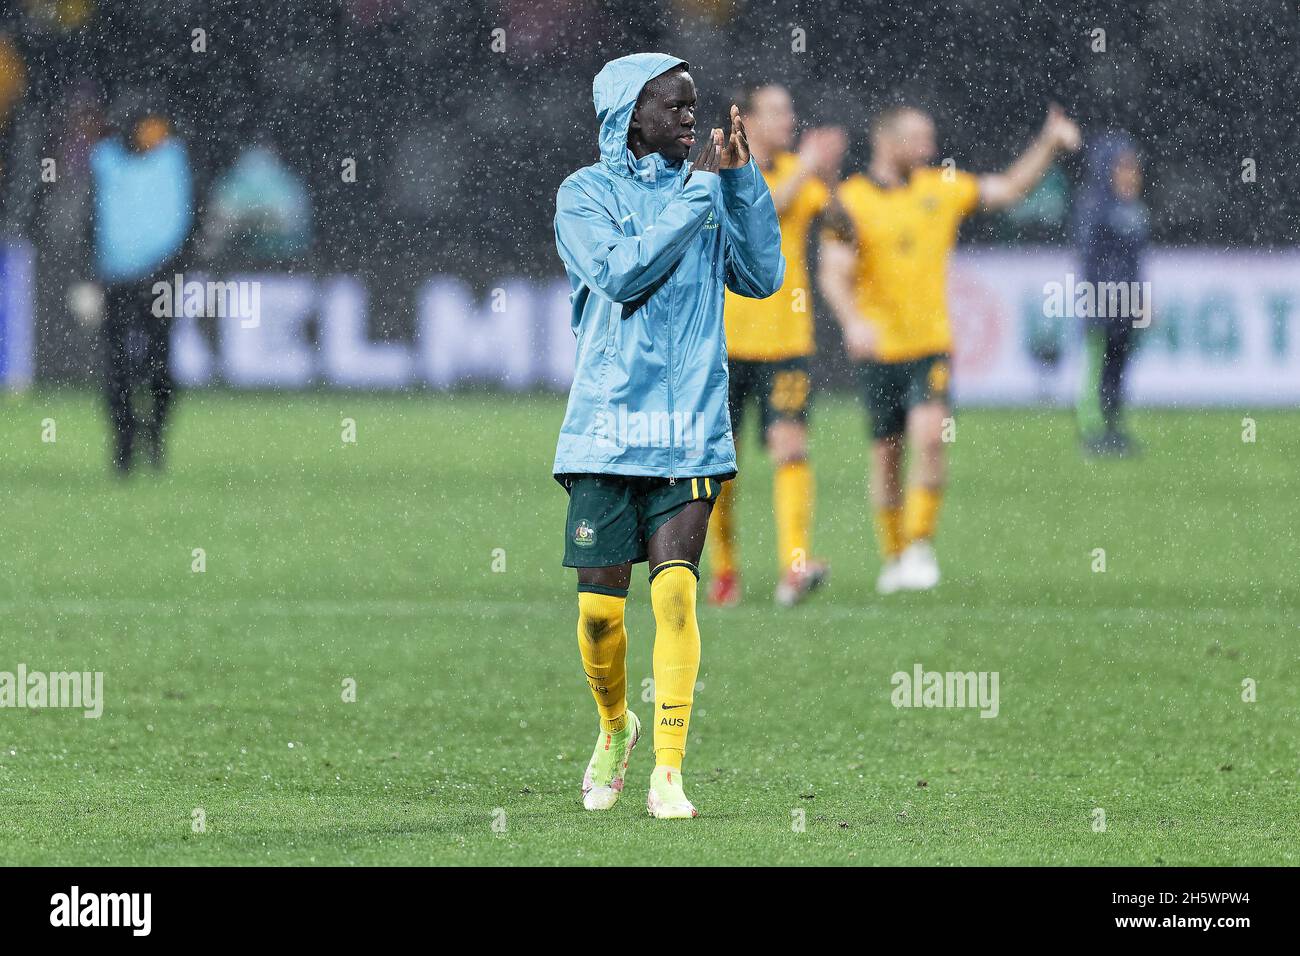 Sydney, Australia. 11th Nov, 2021. AWER MABIL of the Australian Socceroos thanks the crowd after the World Cup Qualifier football match between Australia Socceroos and Saudi Arabia on November 11, 2021 at CommBank Stadium in Sydney, Australia Credit: IOIO IMAGES/Alamy Live News Stock Photo